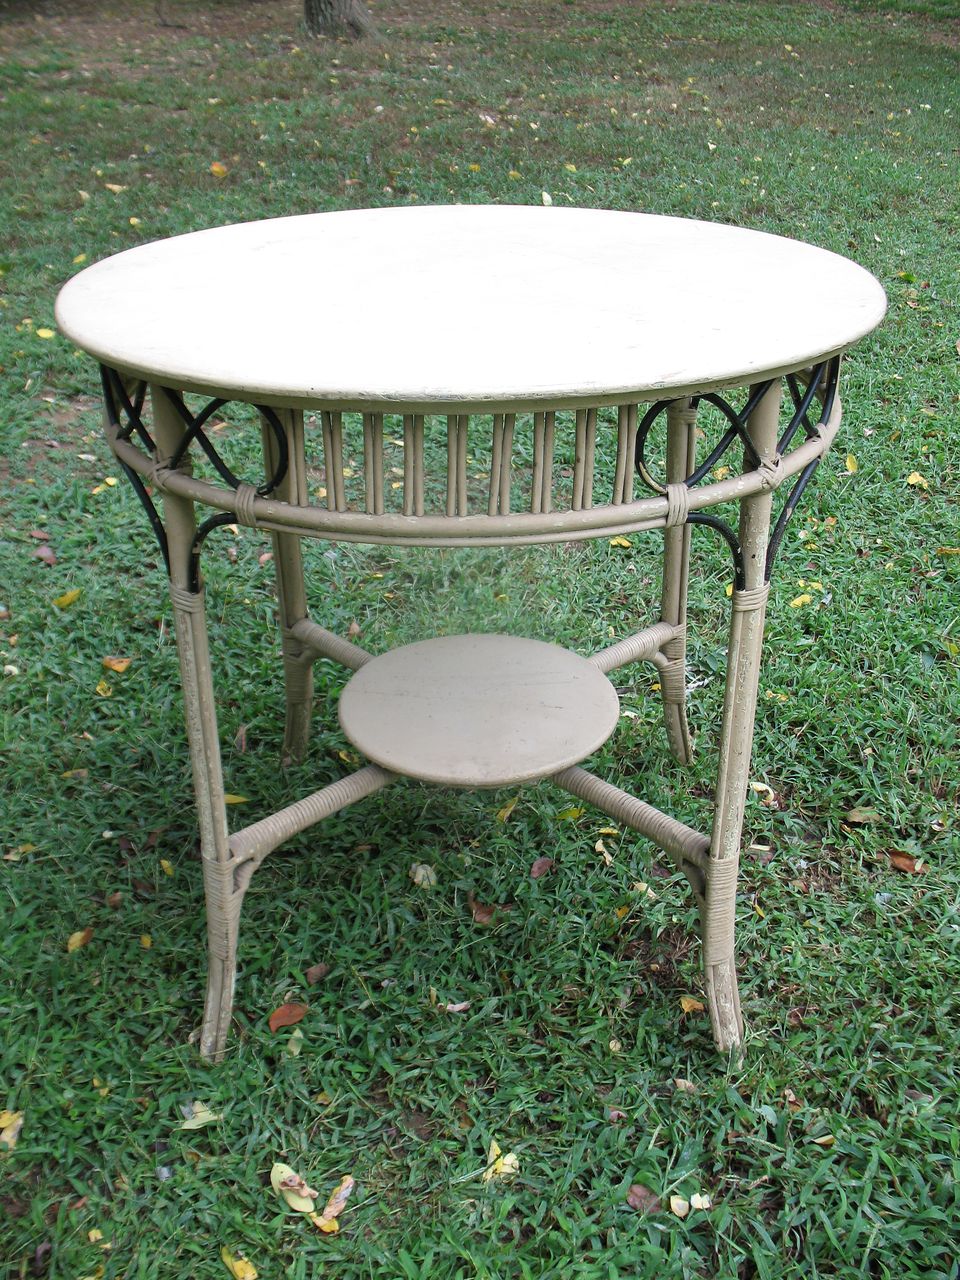 VINTAGE CANE FURNITURE IN FURNITURE - COMPARE PRICES, READ REVIEWS